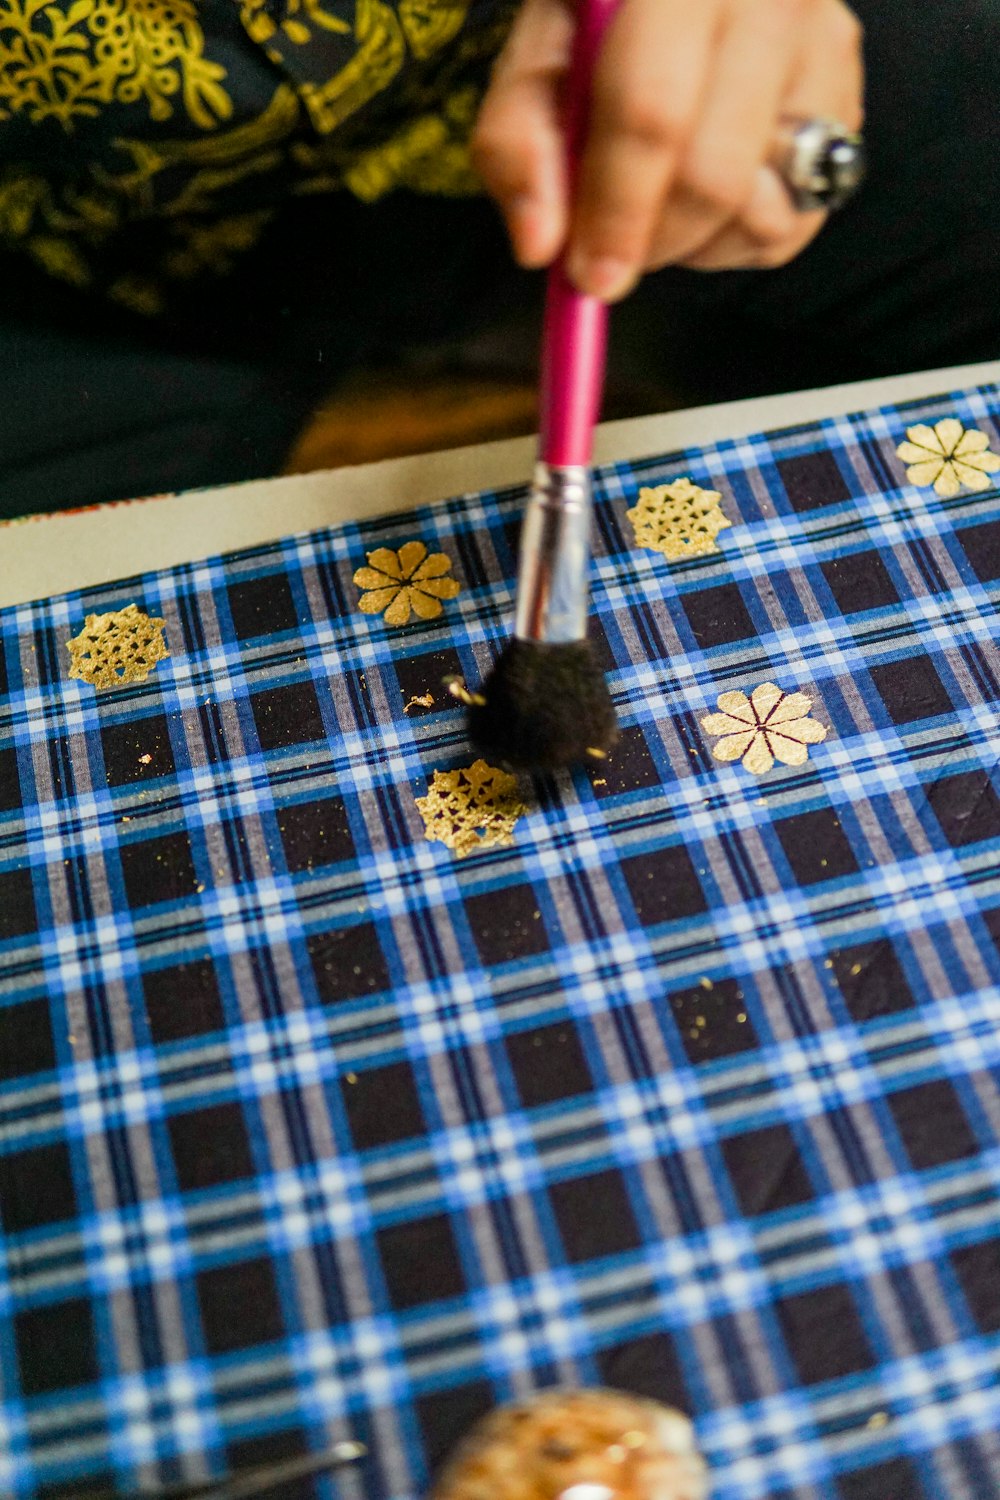 a close up of a person using a brush on a table